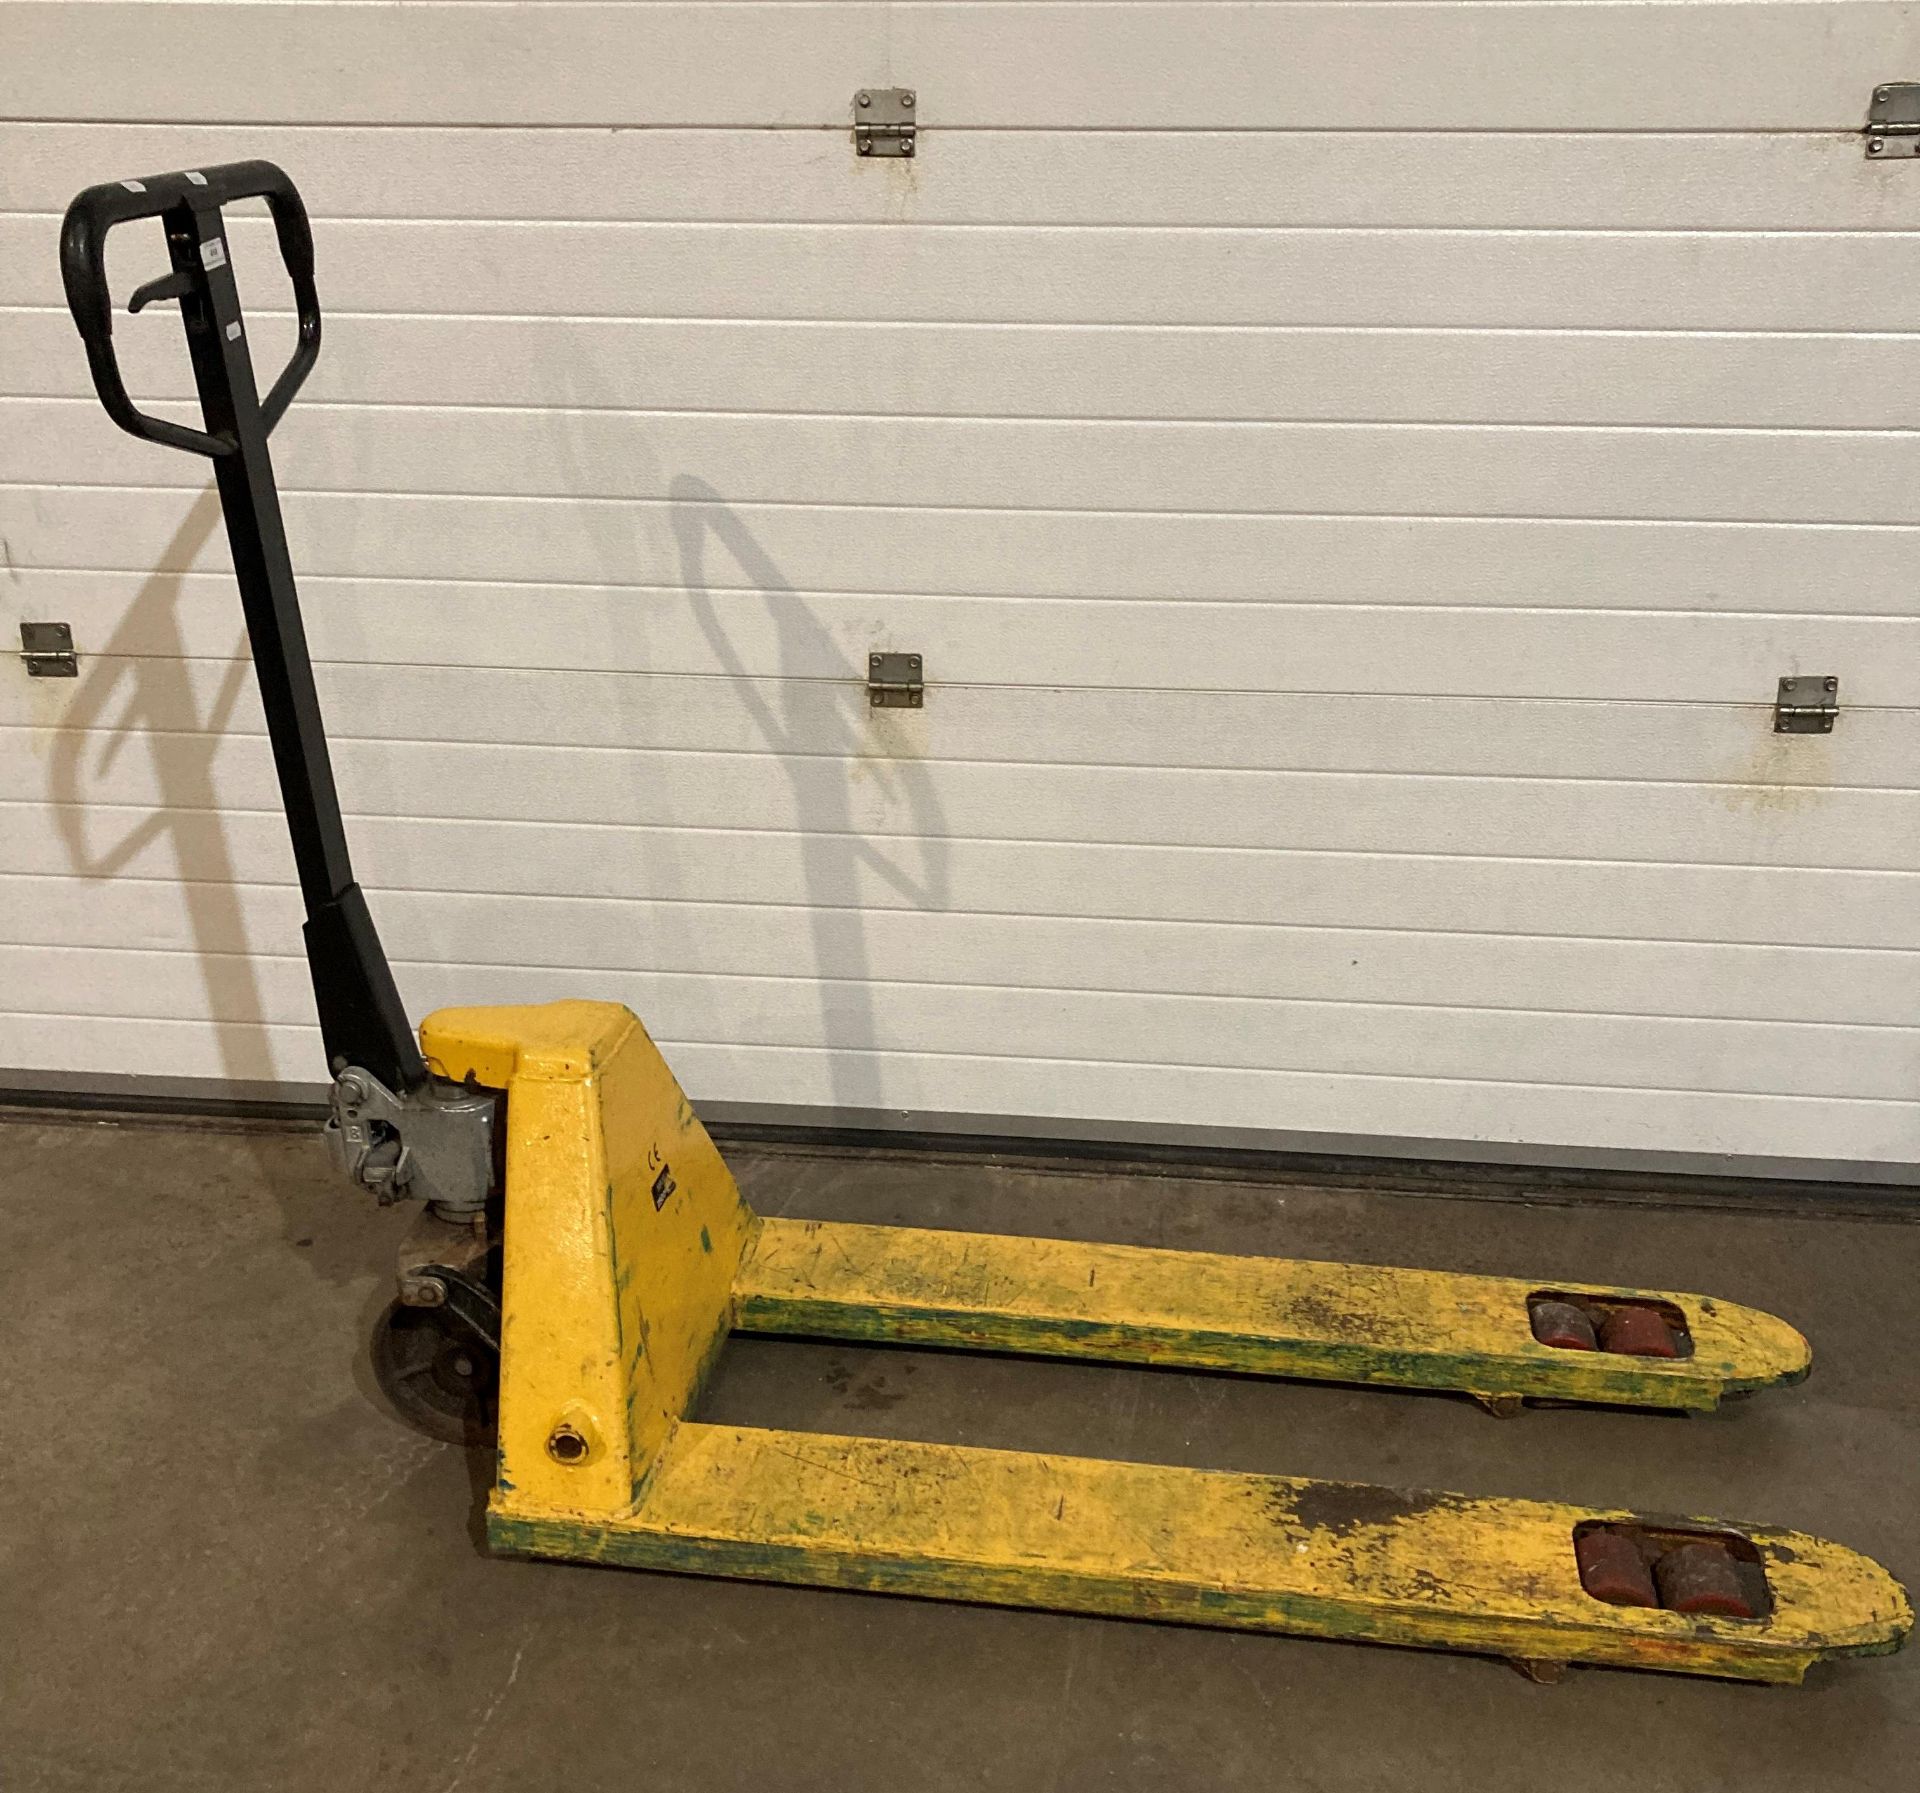 C E 2500kg pallet truck - yellow (saleroom location: RD1) - Image 2 of 2